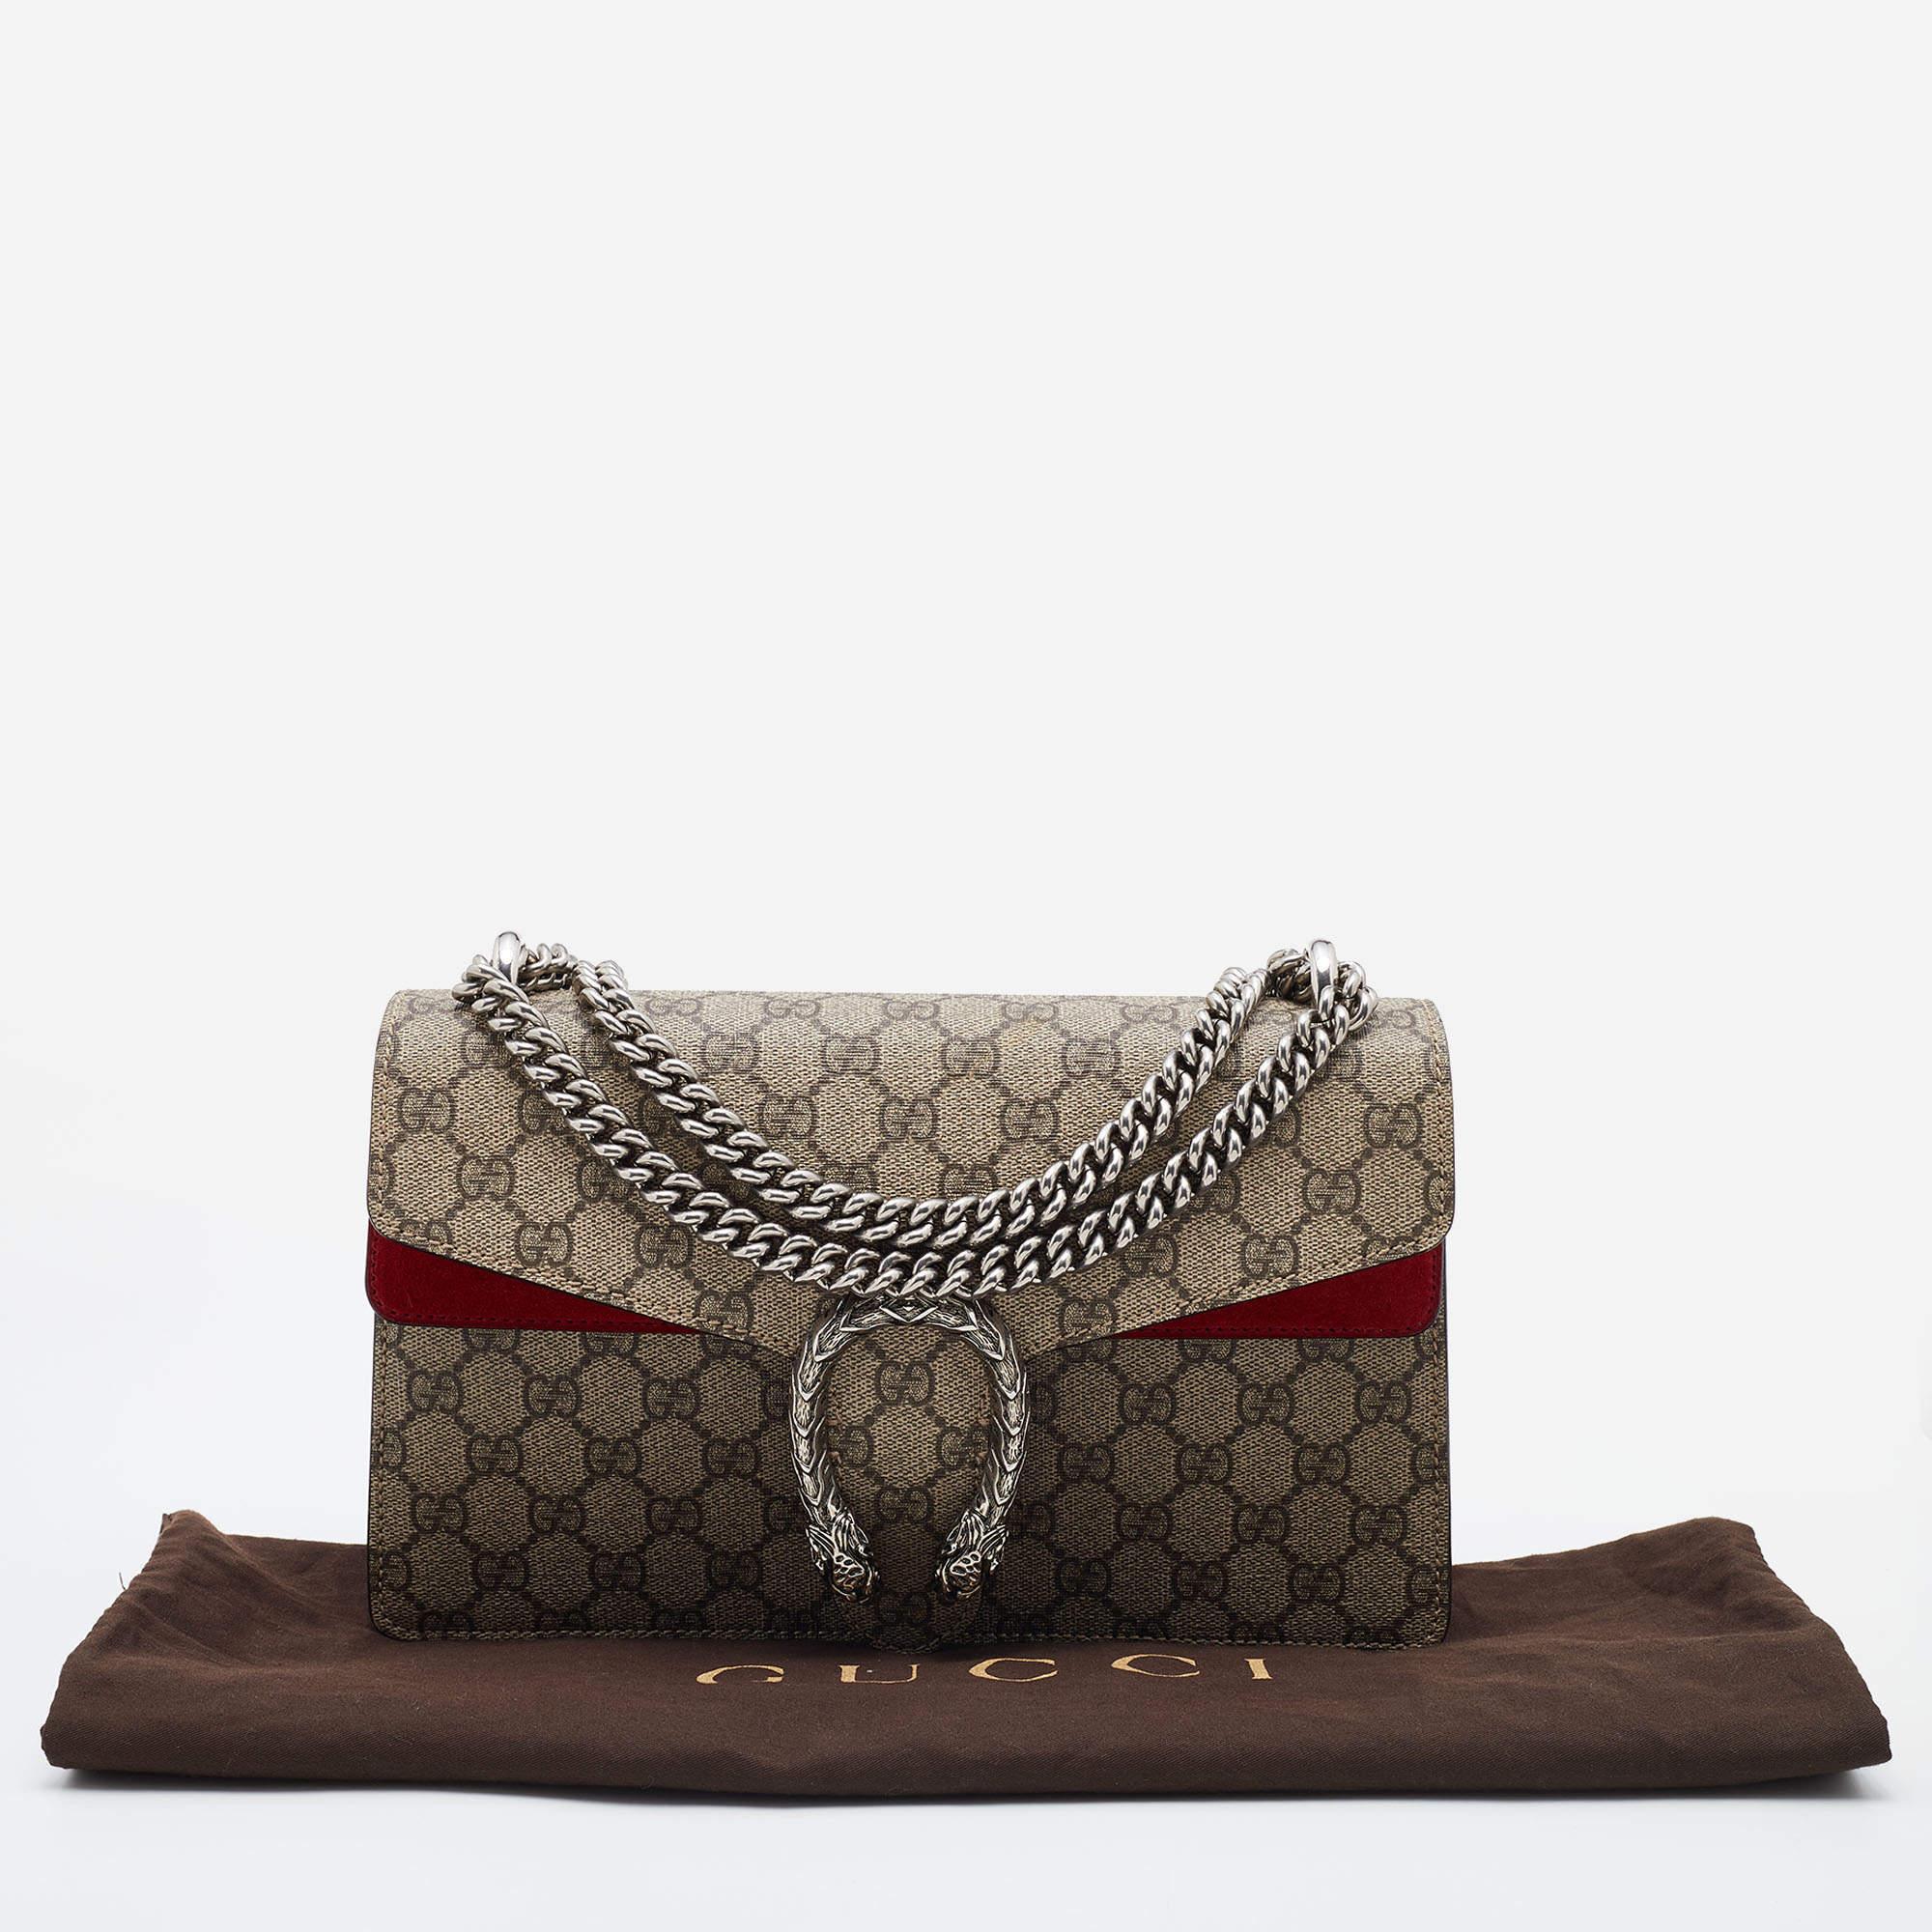 Gucci Beige/Red GG Supreme Canvas and Suede Small Dionysus Shoulder Bag 10